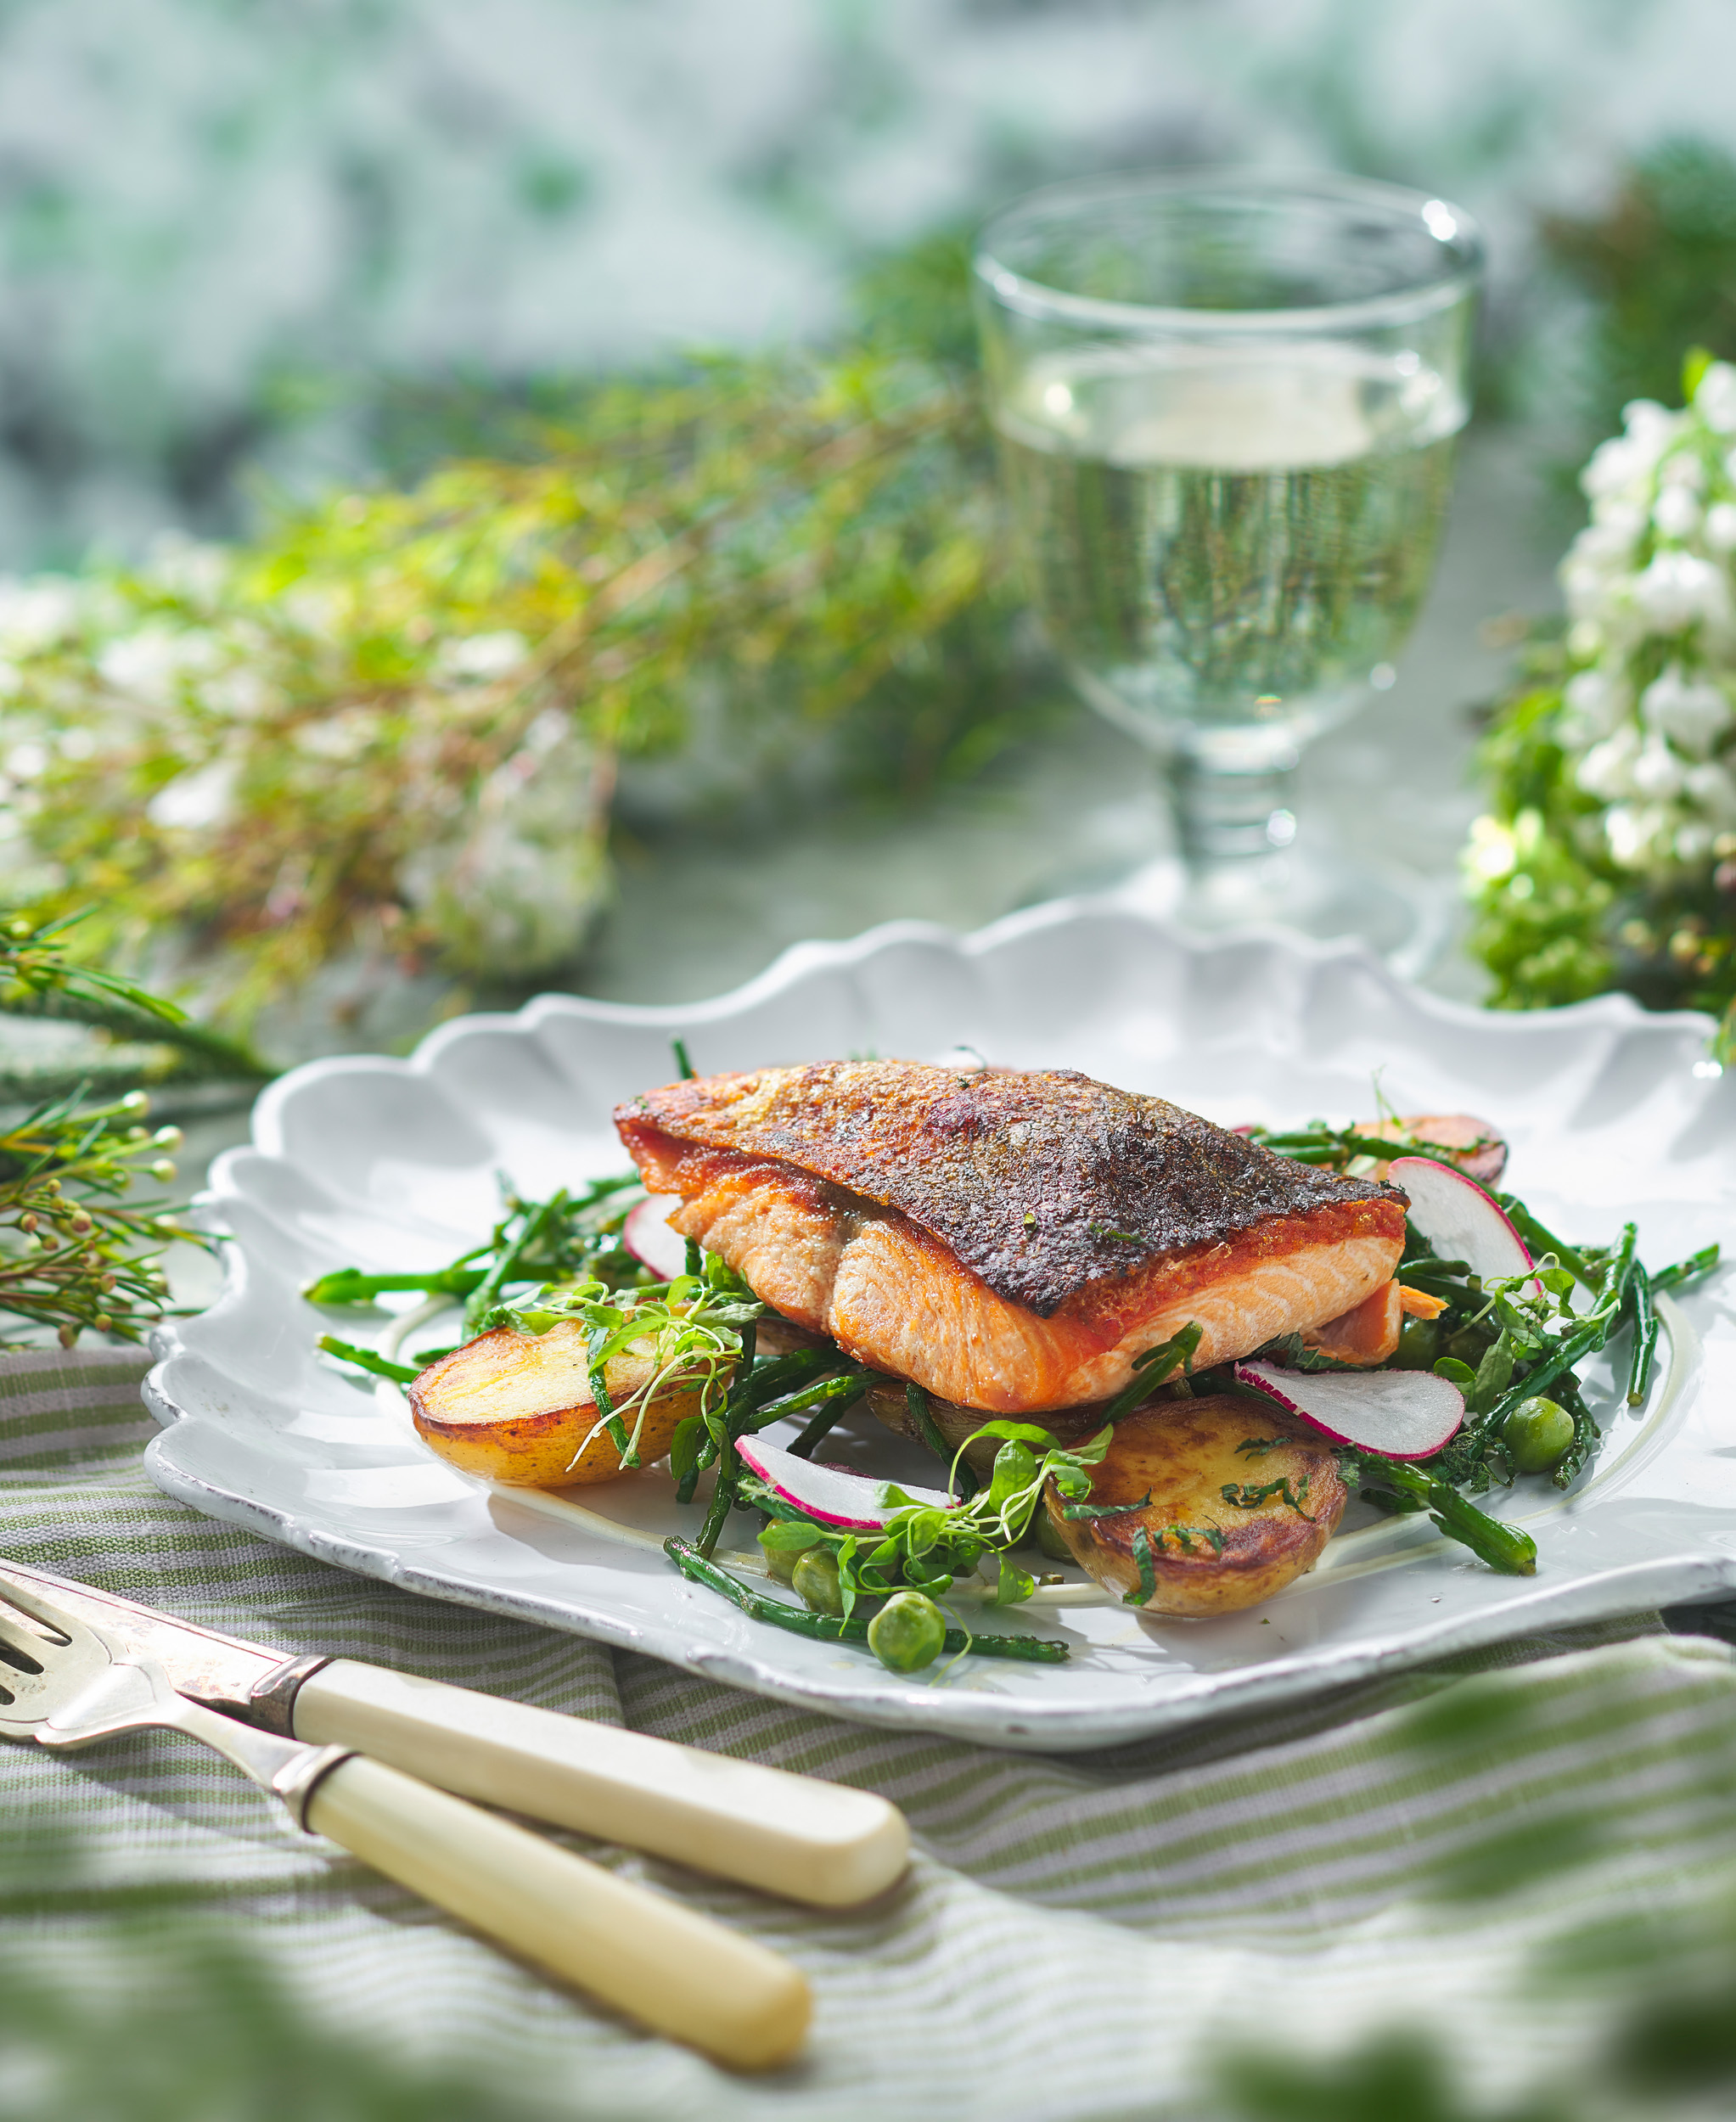 https://www.drakeandmorgan.co.uk/the-otherist/wp-content/uploads/sites/65/2022/06/Seafood-Trout-3-1.jpg